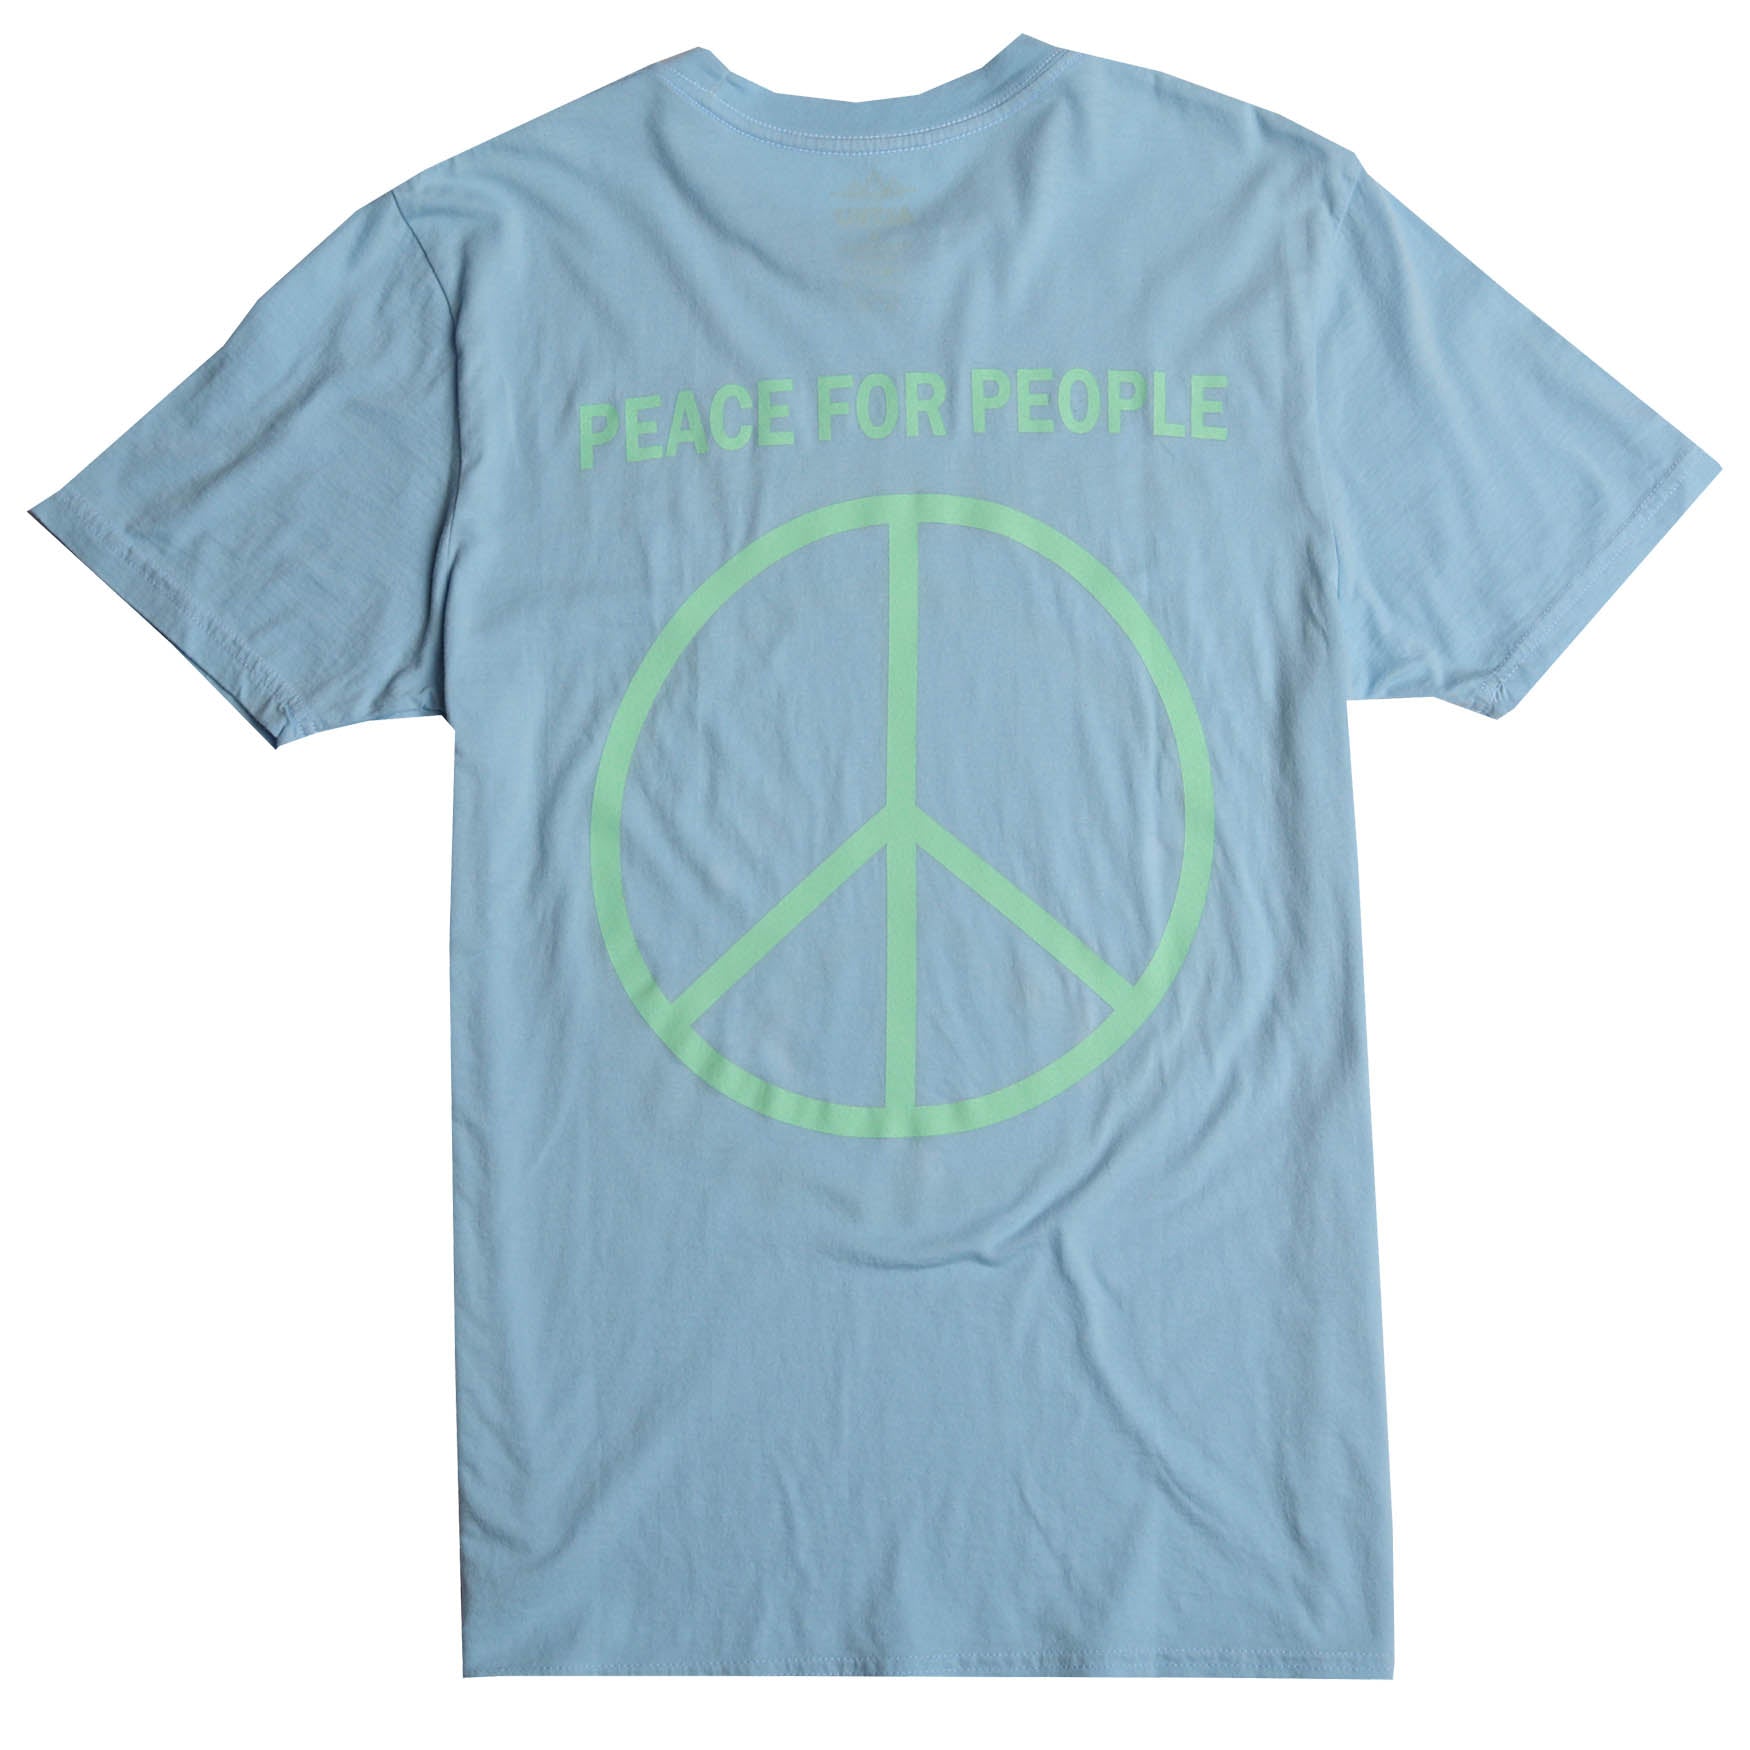 PEOPLE FOR PEACE graphic tee